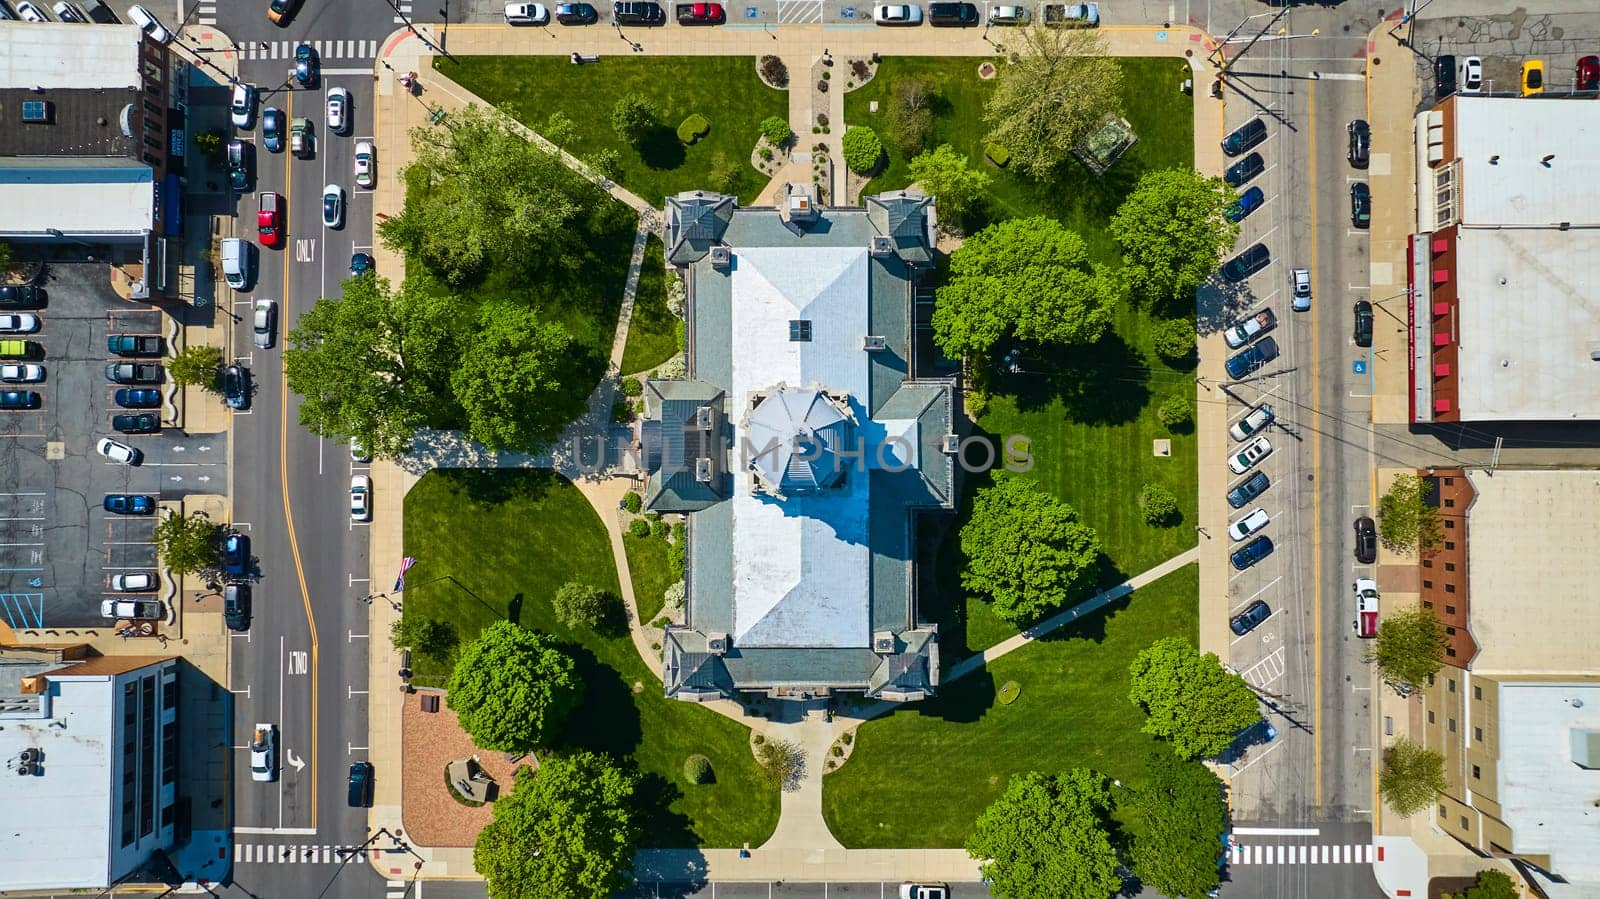 Aerial view of Kosciusko County Courthouse, Indiana, surrounded by lush greenery and busy city roads.